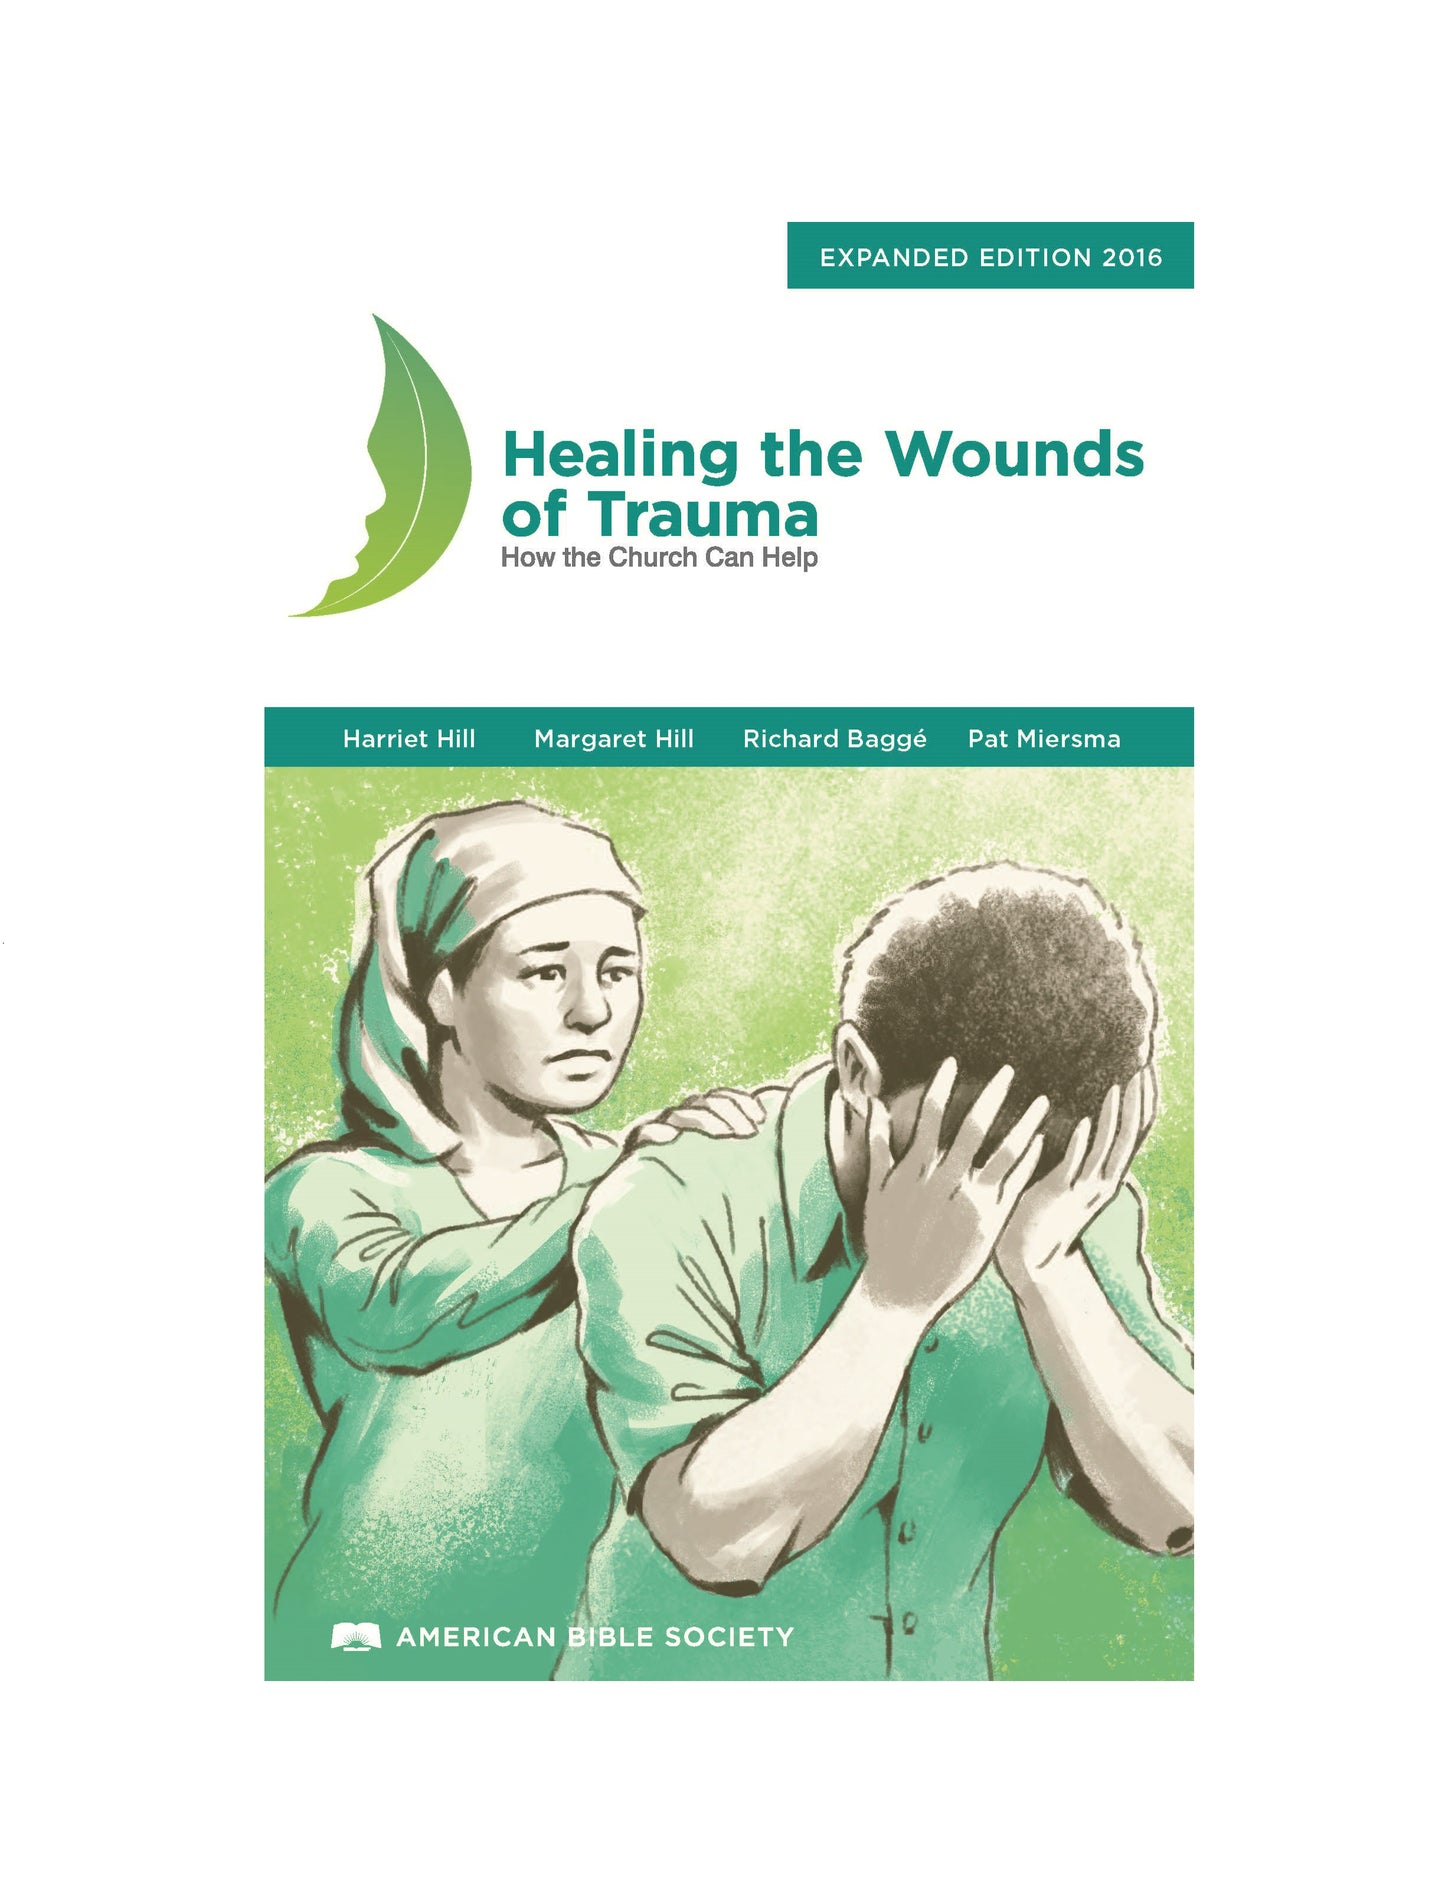 Healing the Wounds of Trauma: How the Church Can Help, Expanded Edition 2016 - Print on Demand